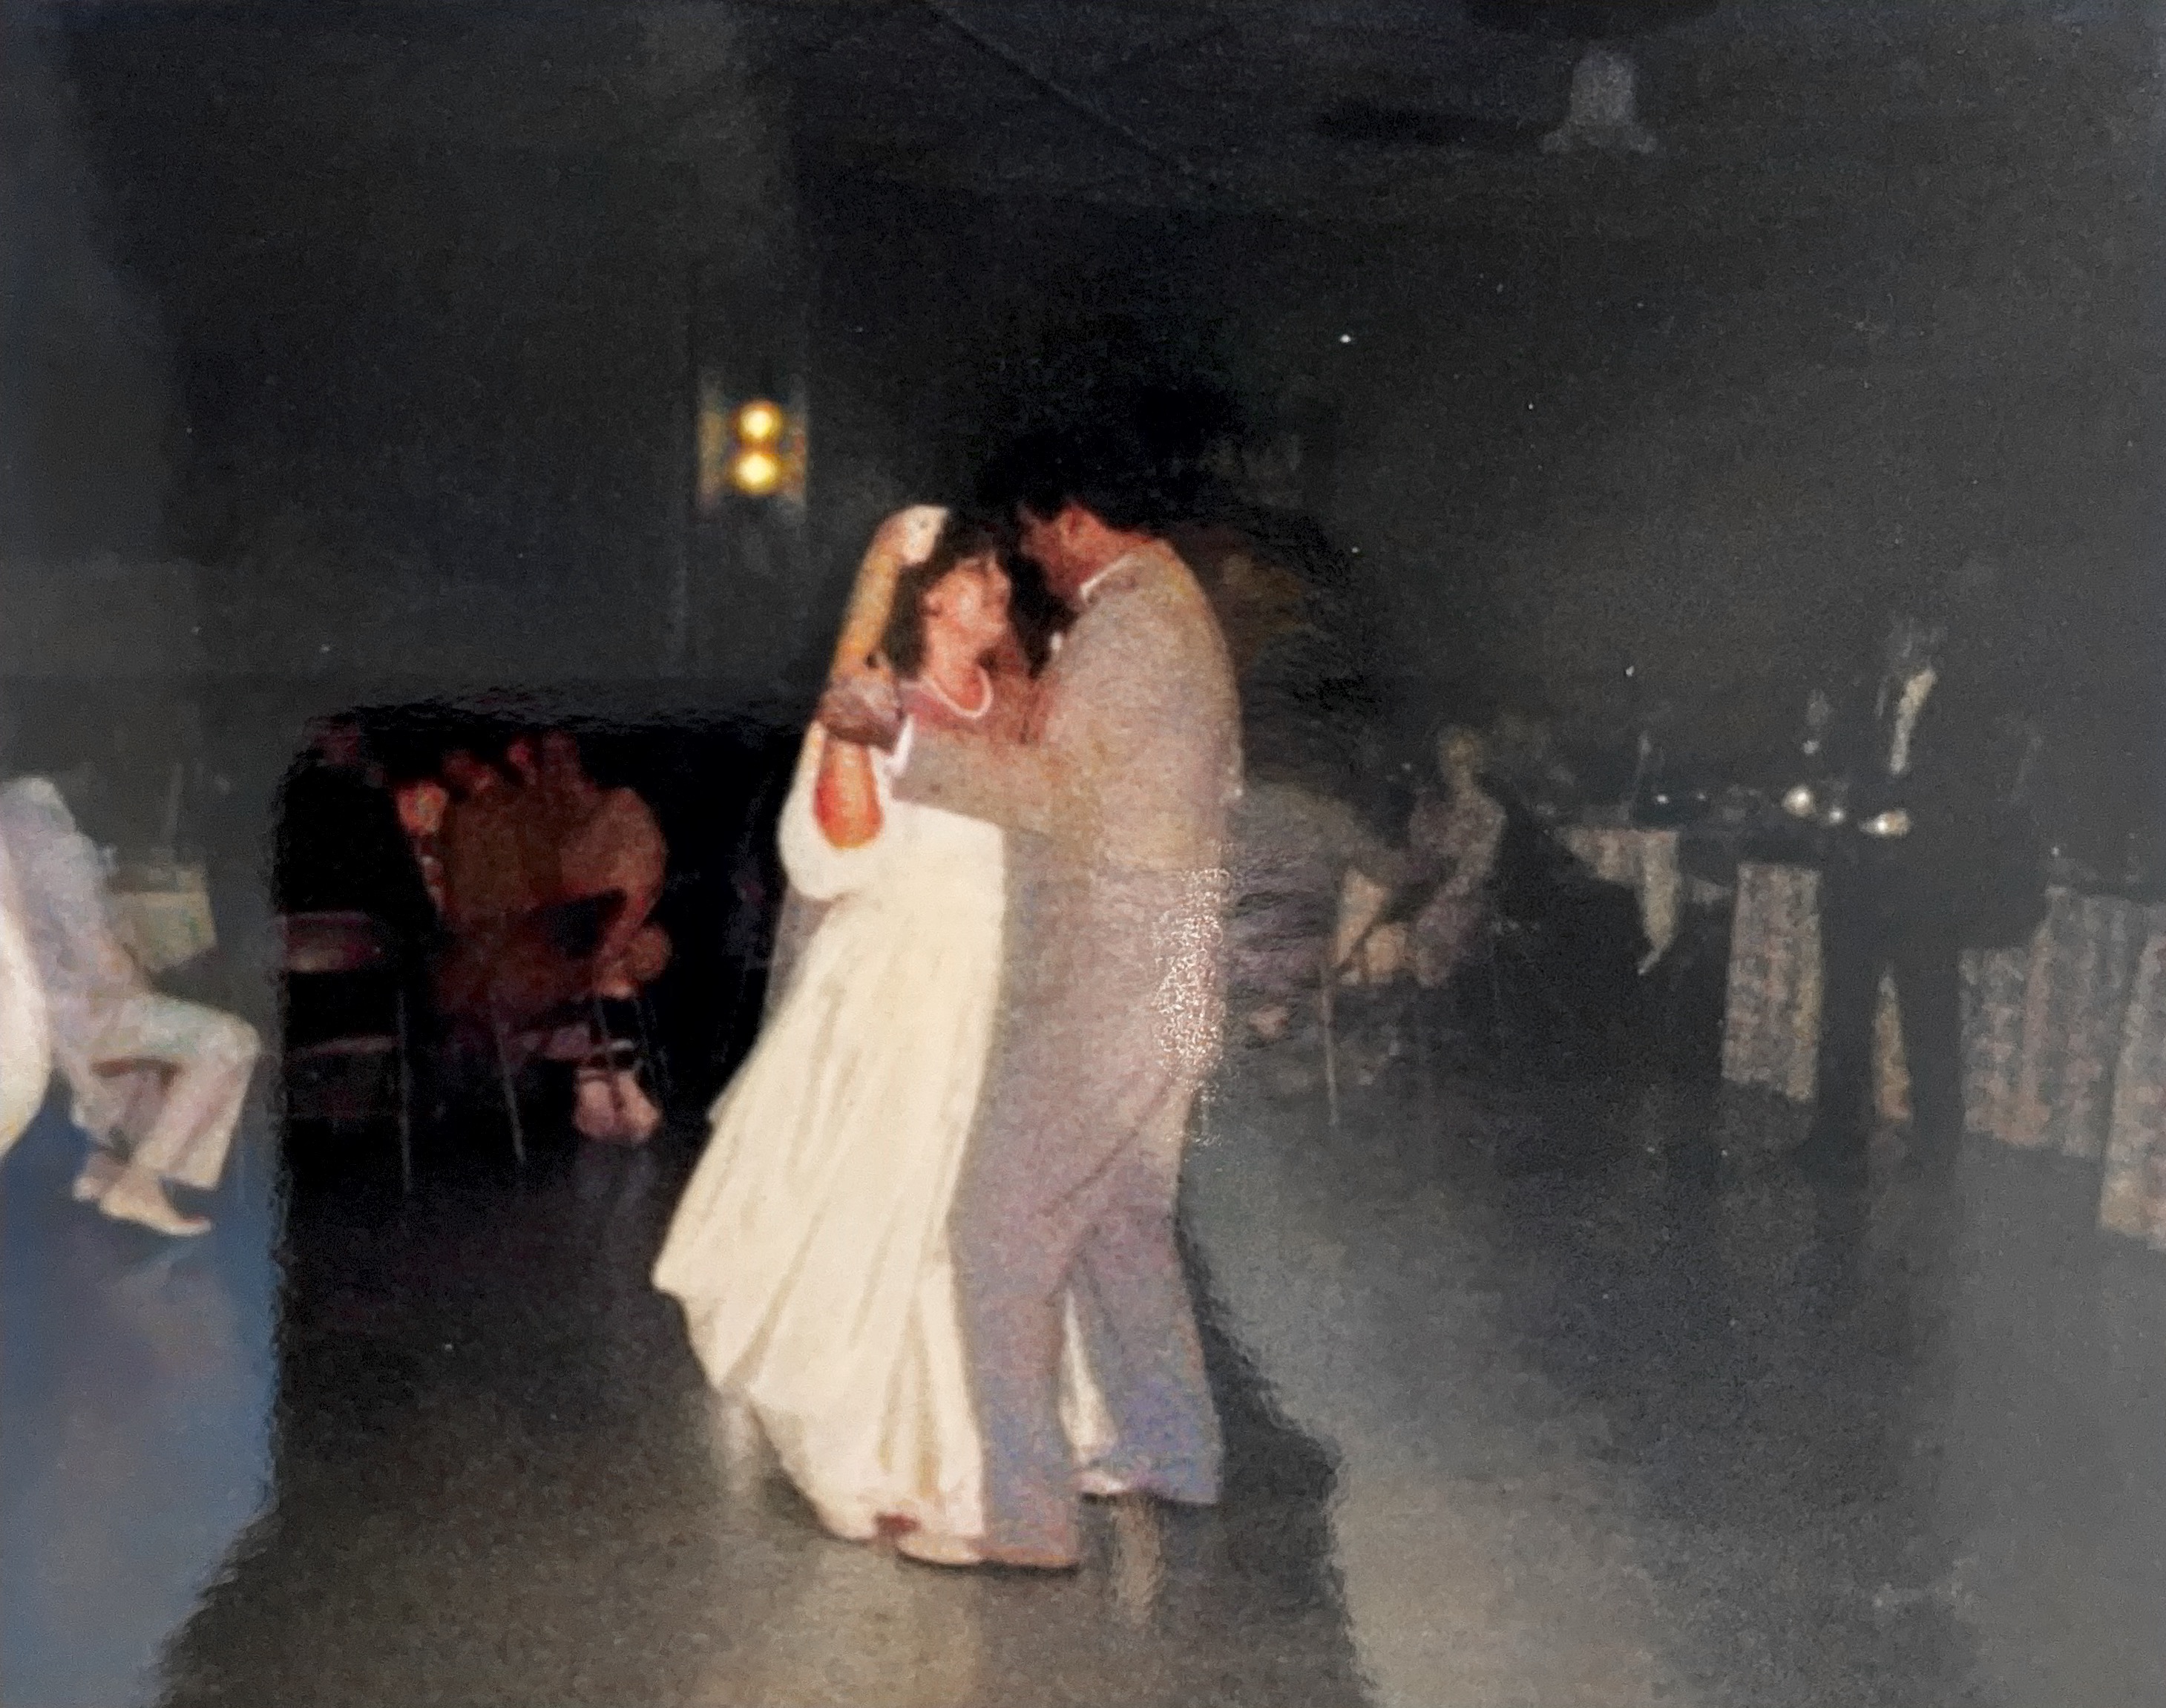 Dancing with daddy 10/4/1986